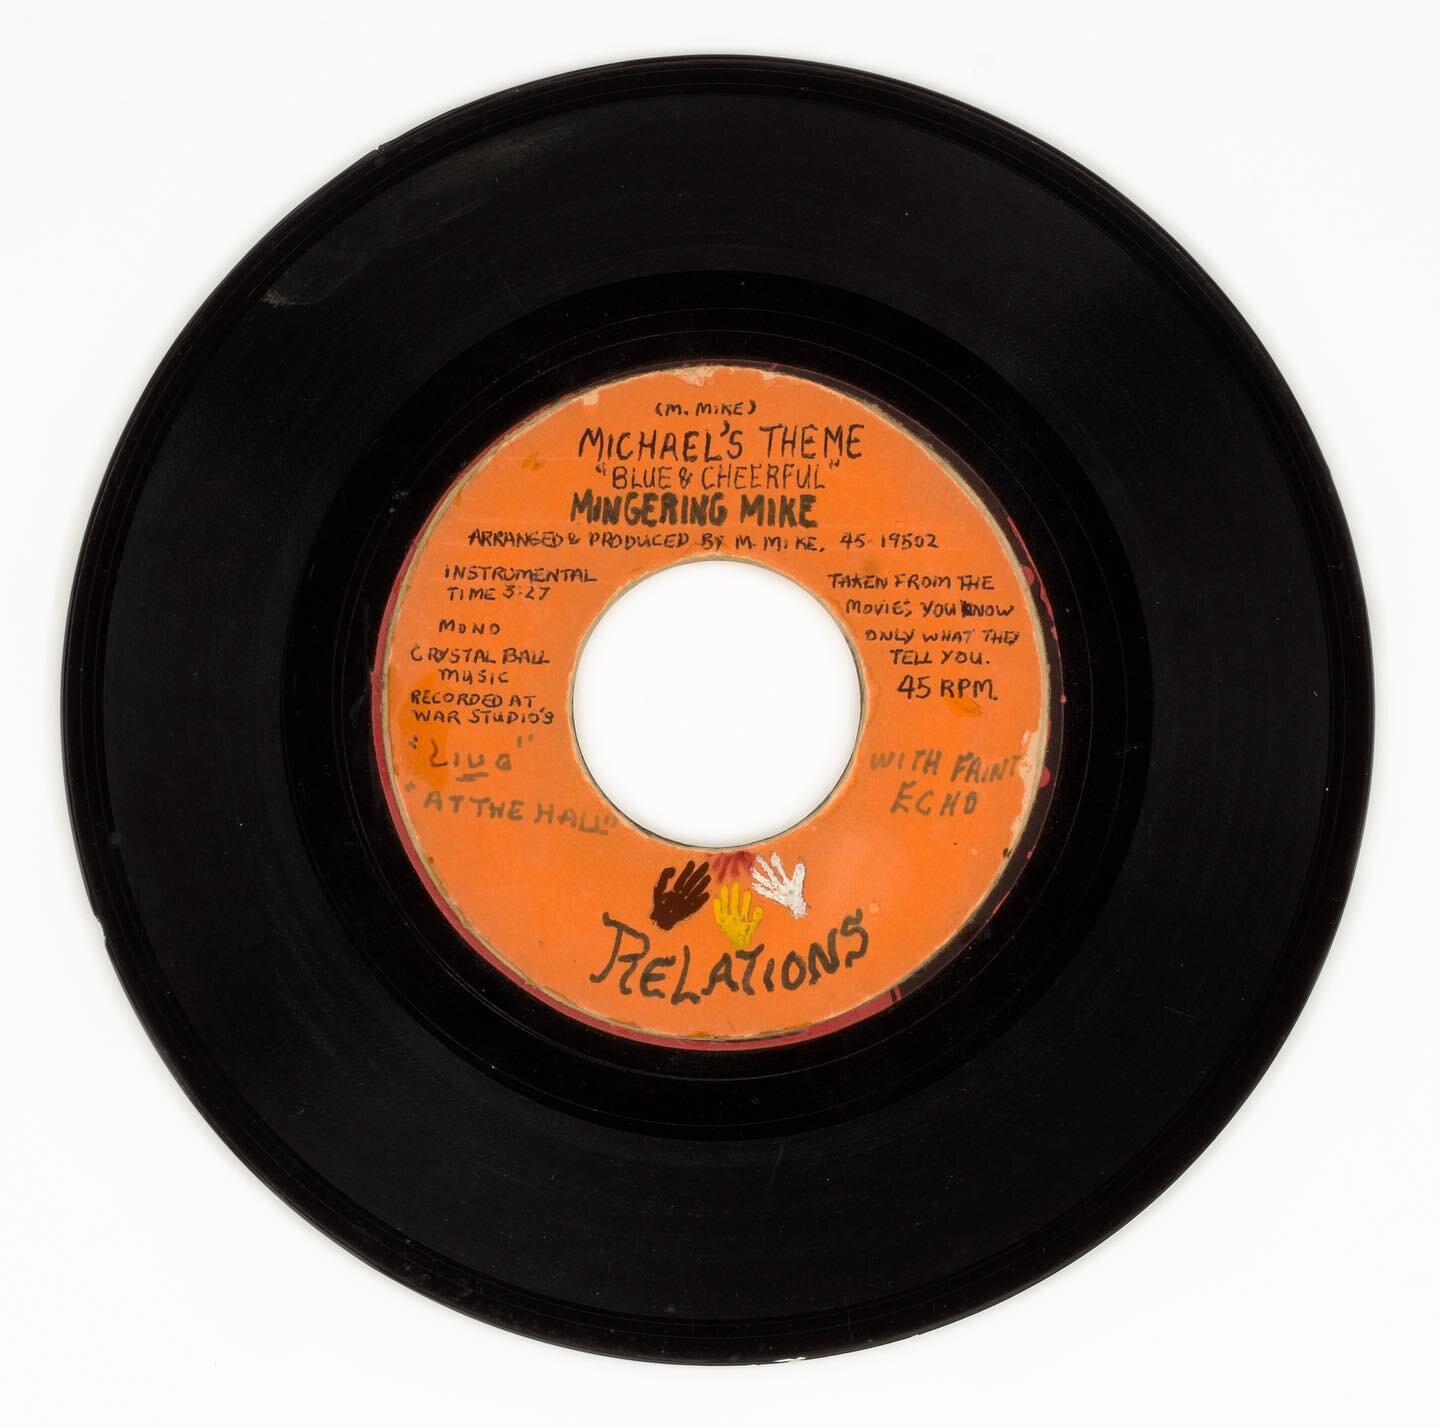 Mingering Mike - Michael&rsquo;s Theme (&ldquo;Blue &amp; Cheerful&rdquo;) *Taken from the movie &ldquo;You Only Know What They Tell You&rdquo;) (Relations Records 45-19502, Acetate). &copy; Mingering Mike. Smithsonian American Art Museum. Gift of Mi